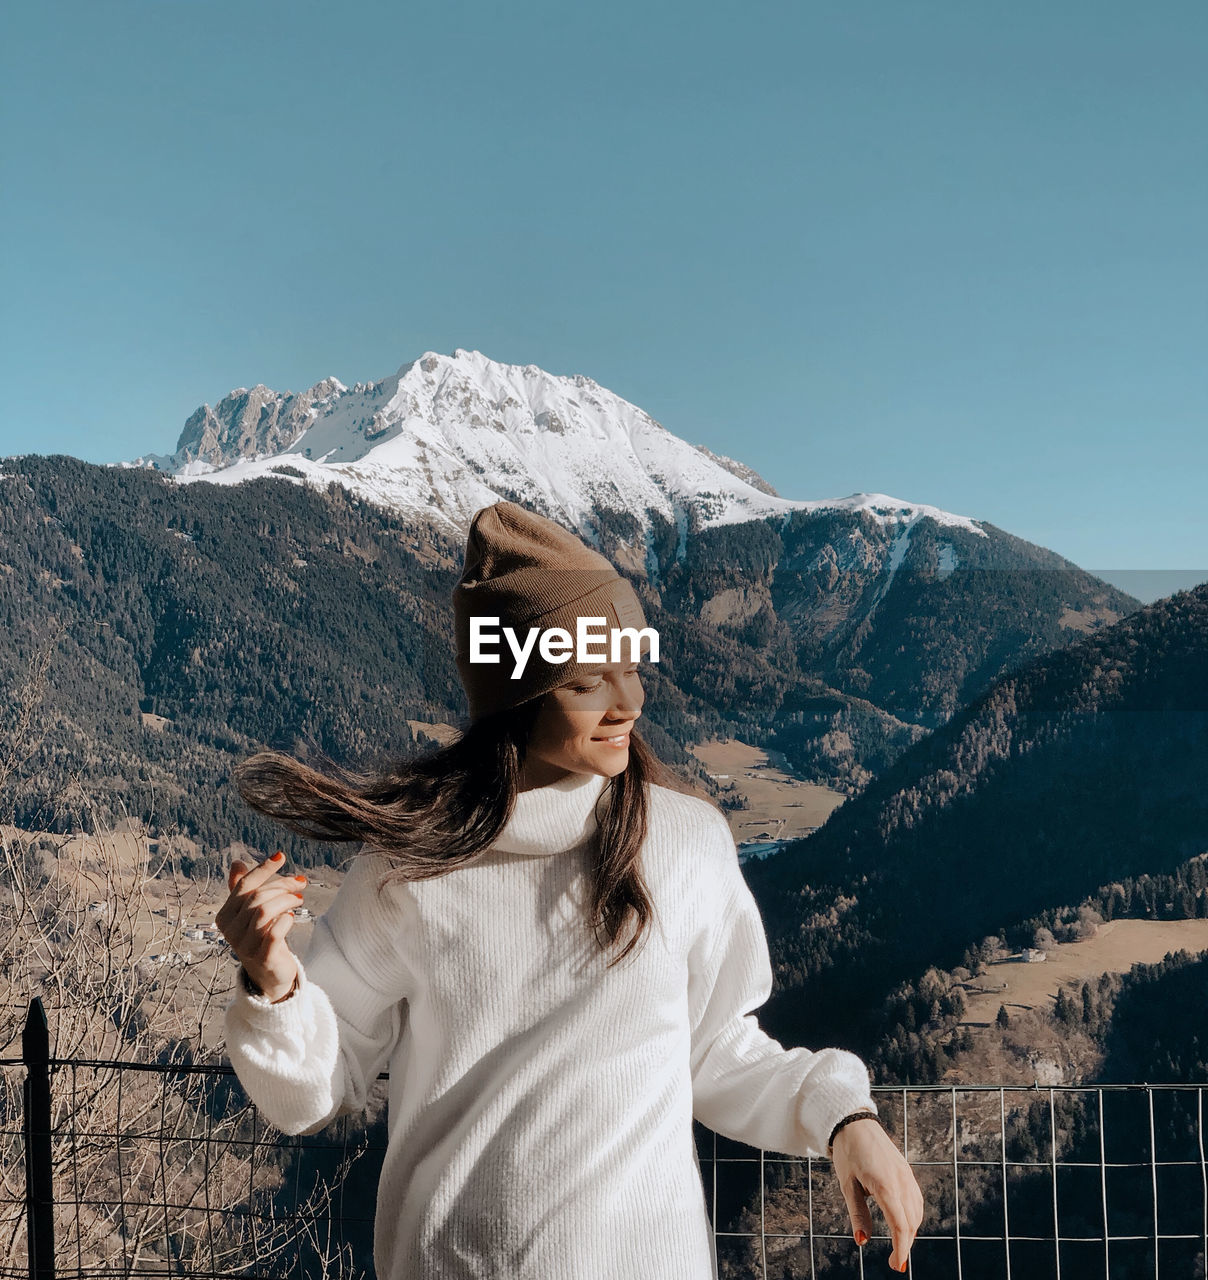 Young woman standing against snowcapped mountain and sky